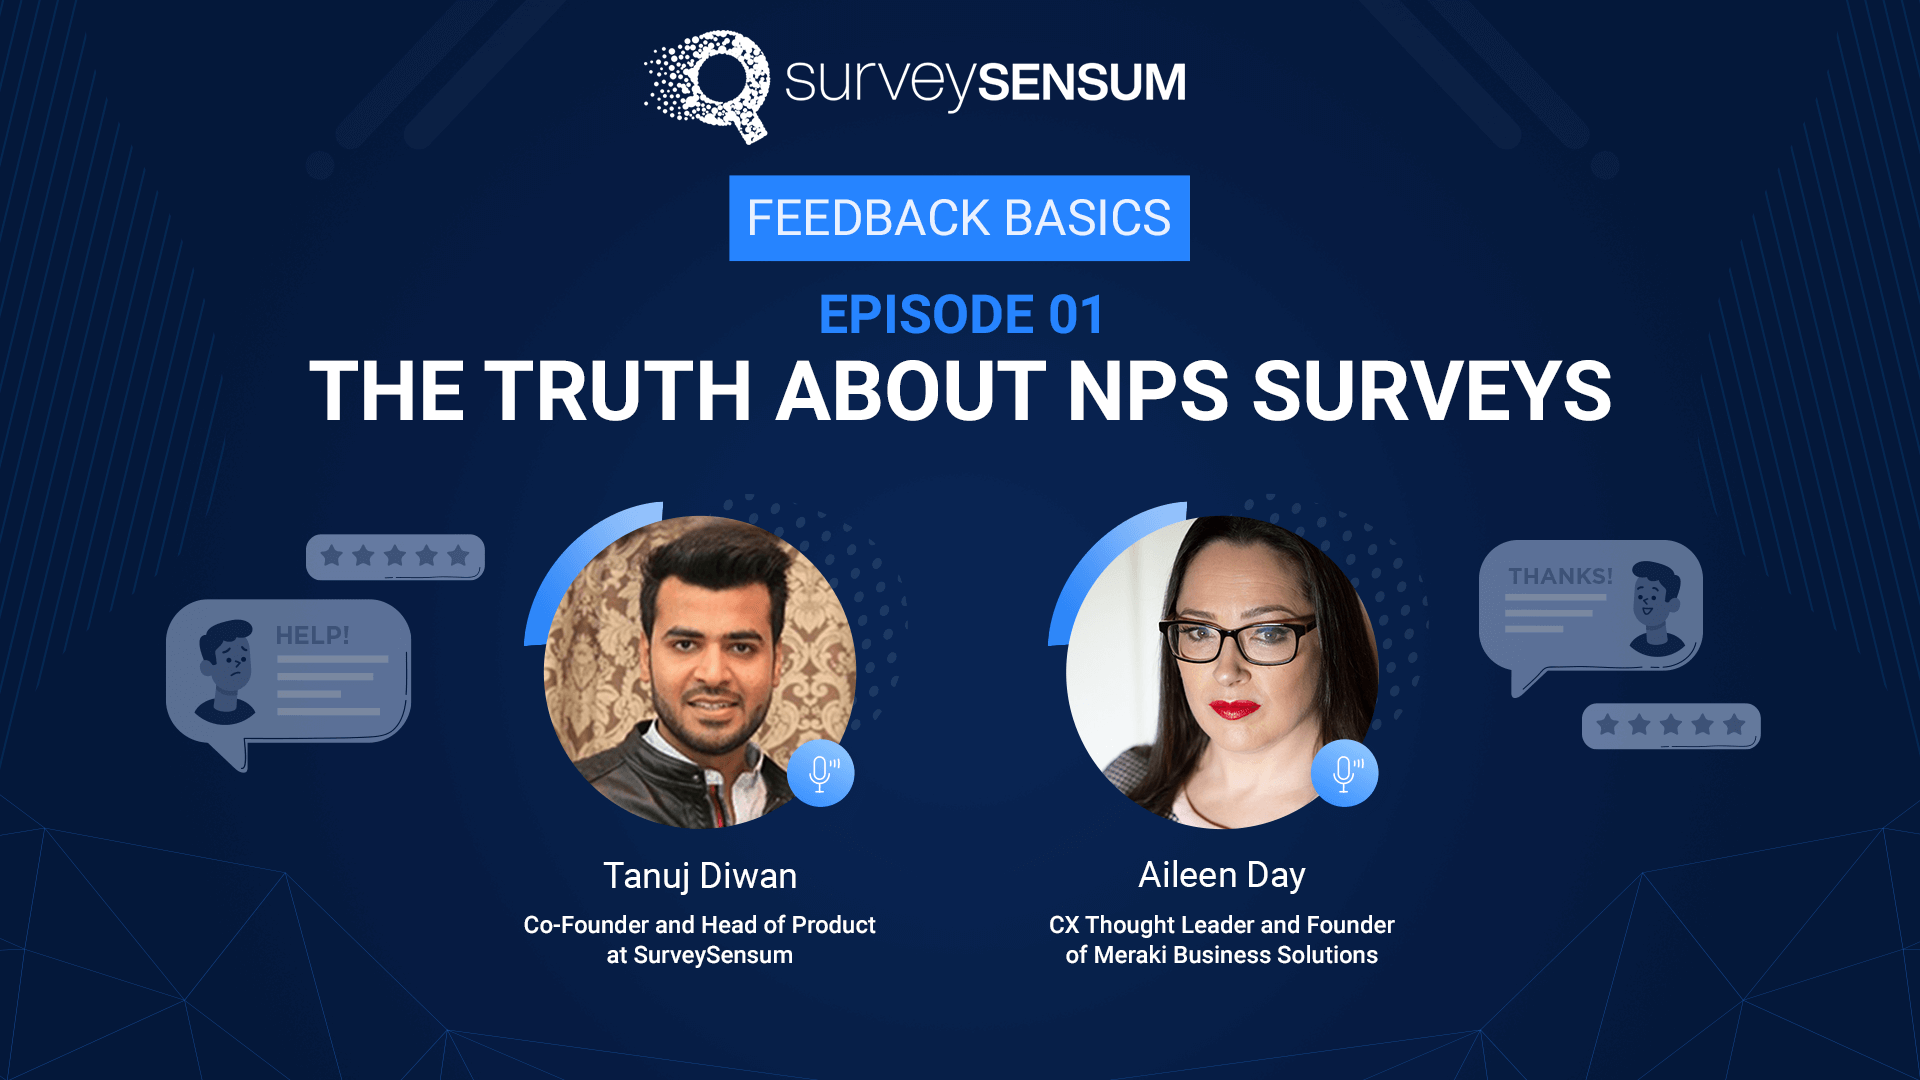 The truth about NPS surveys